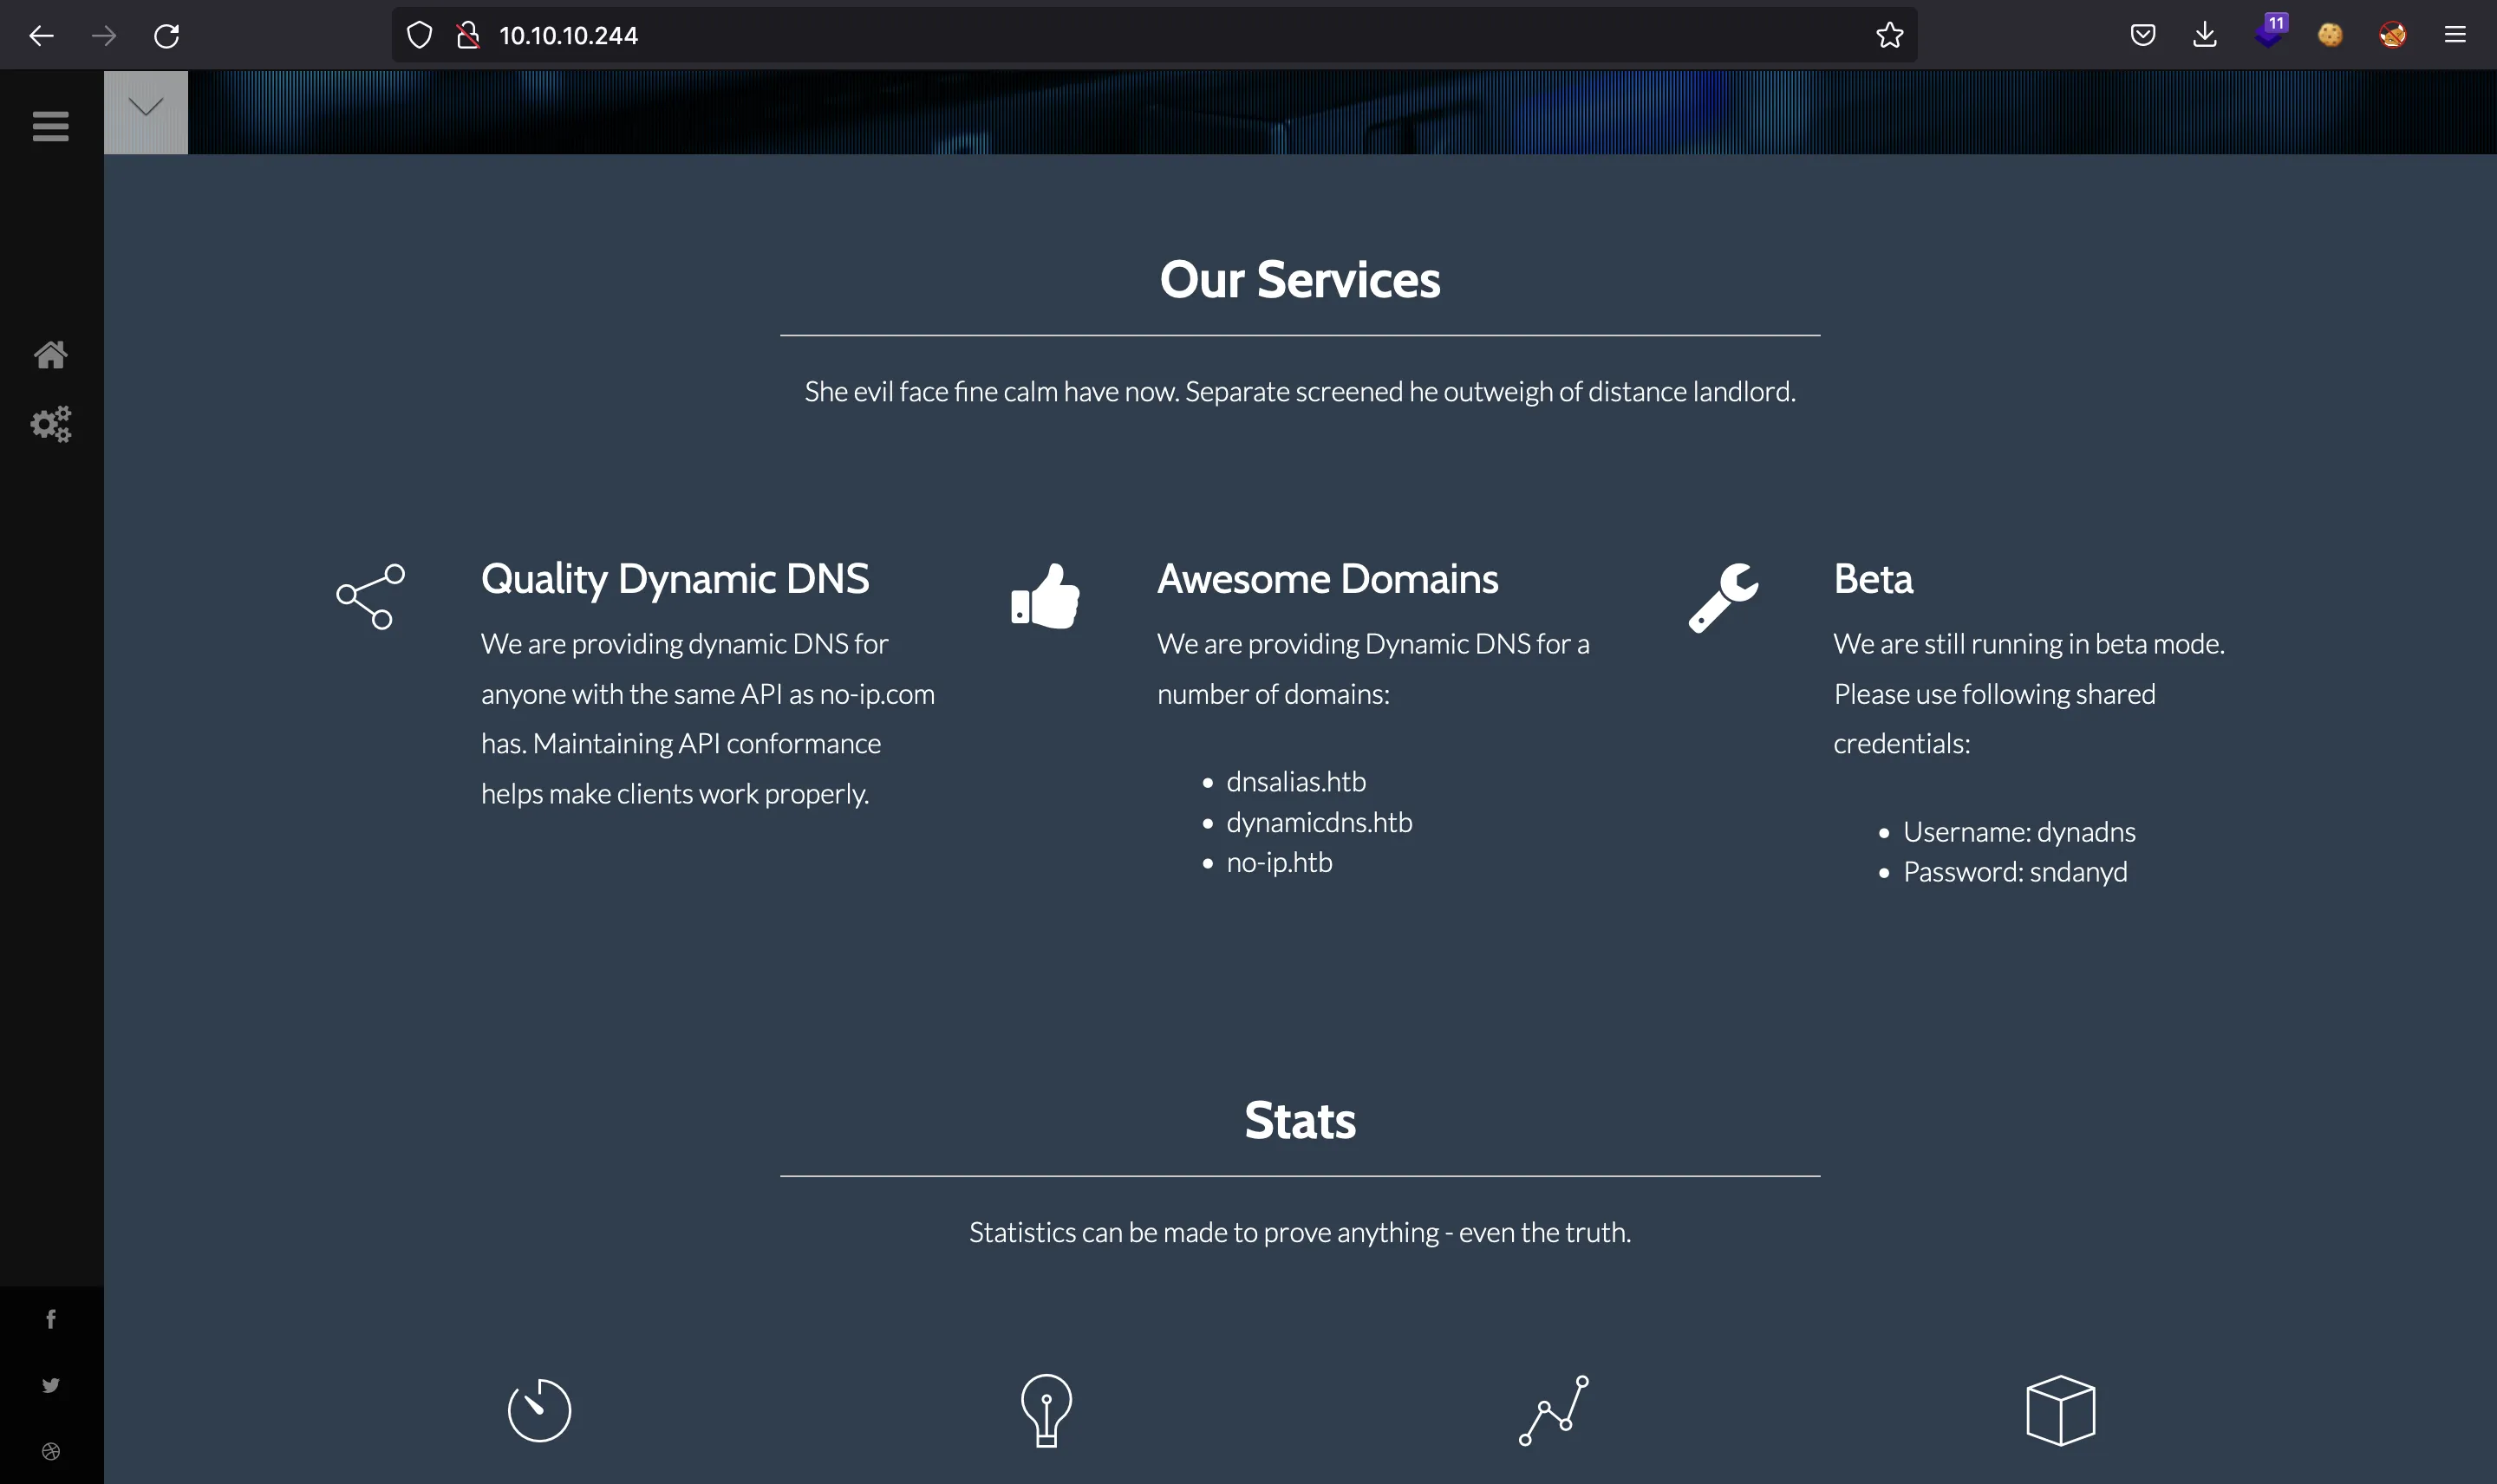 DYNA DNS services information